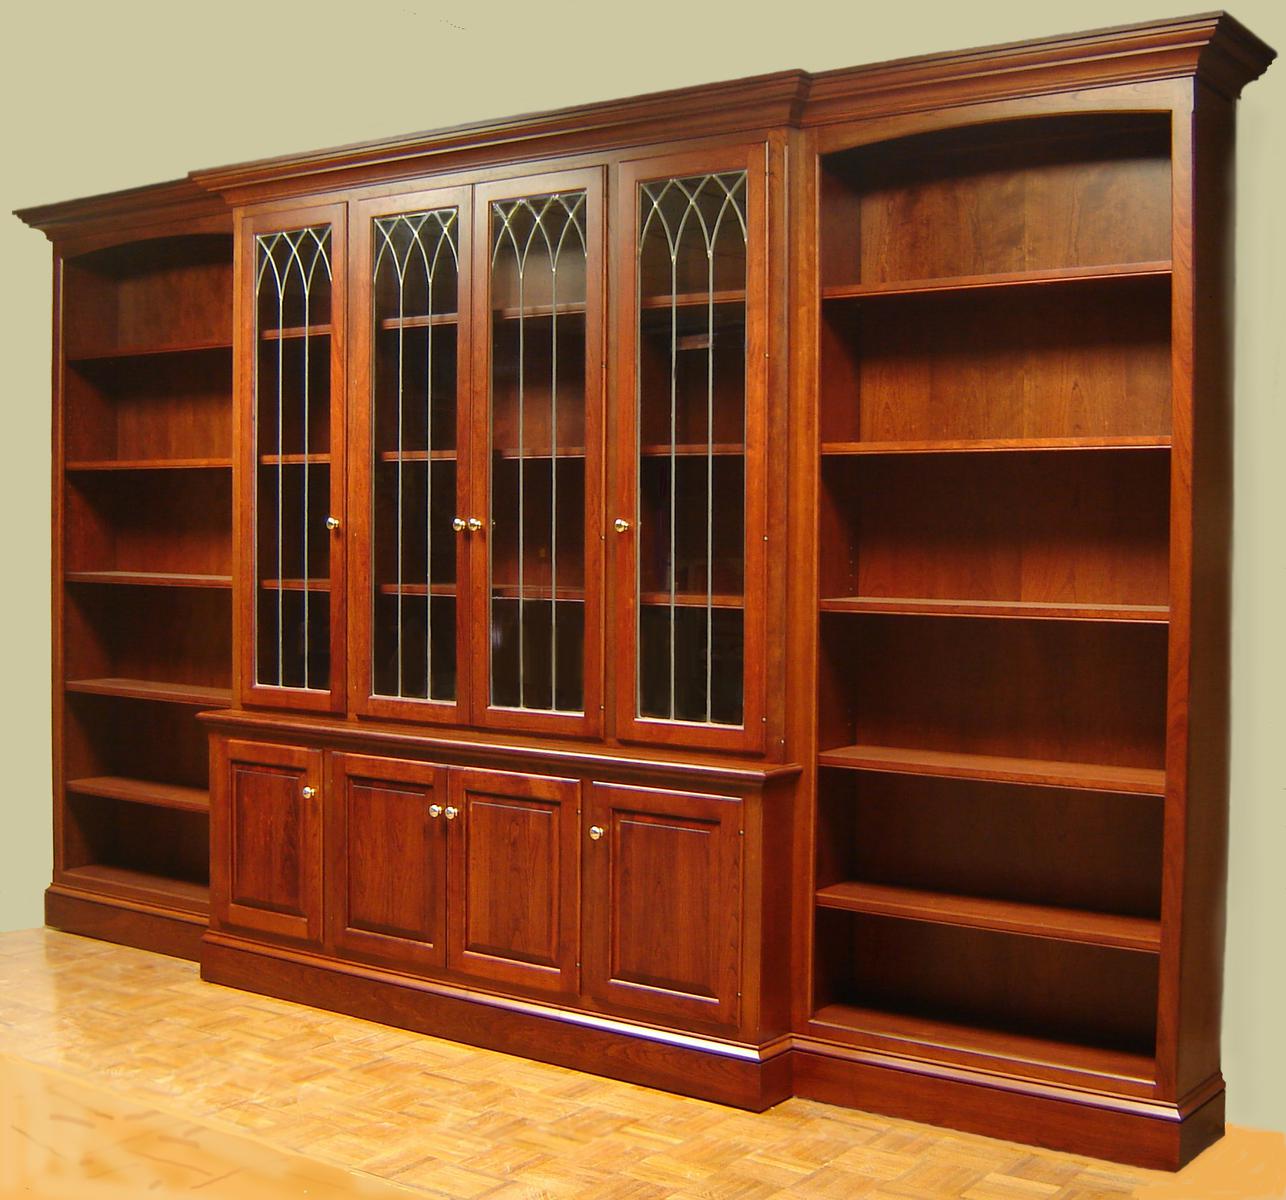 Custom Bookcase | Starting Your Business